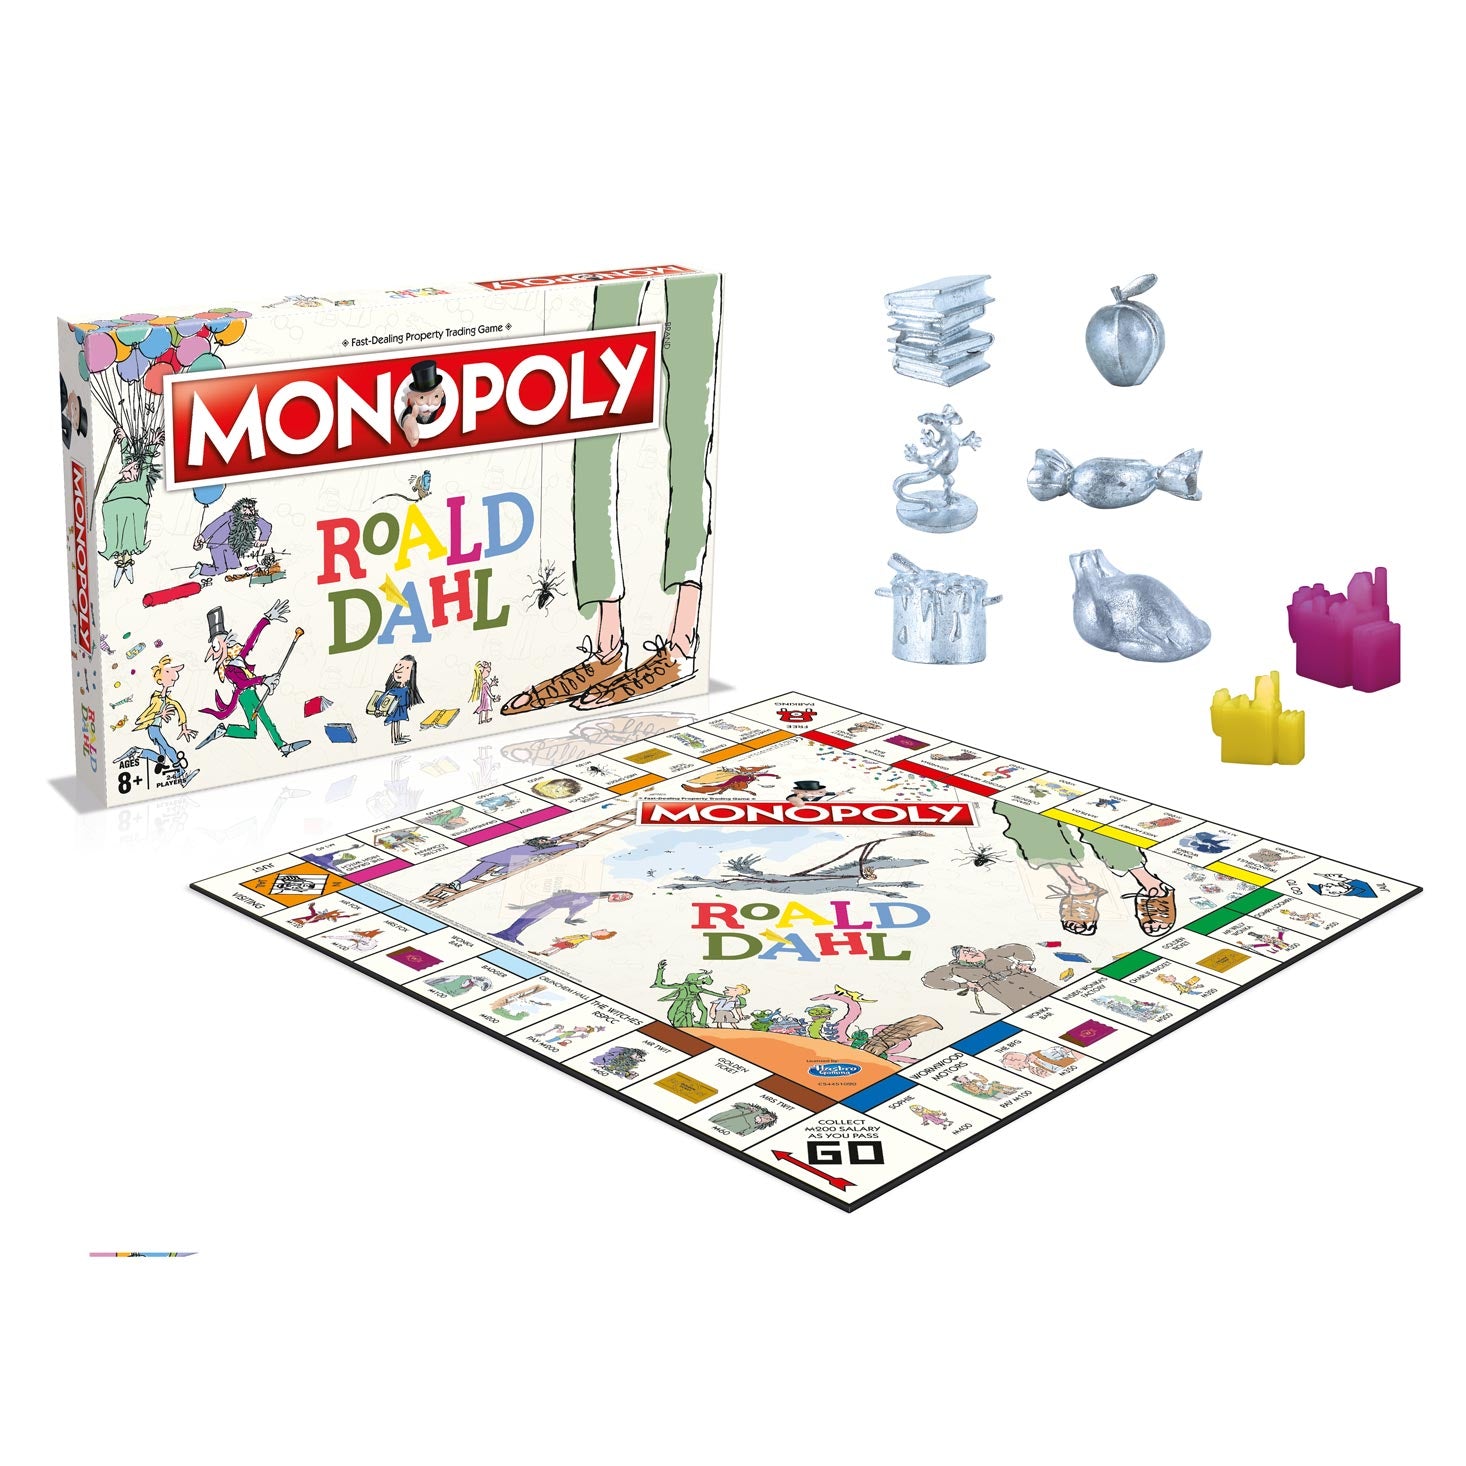 Monopoly board game based on characters by Roald Dahl and featuring Quentin Blake's illustrations- game pieces showing